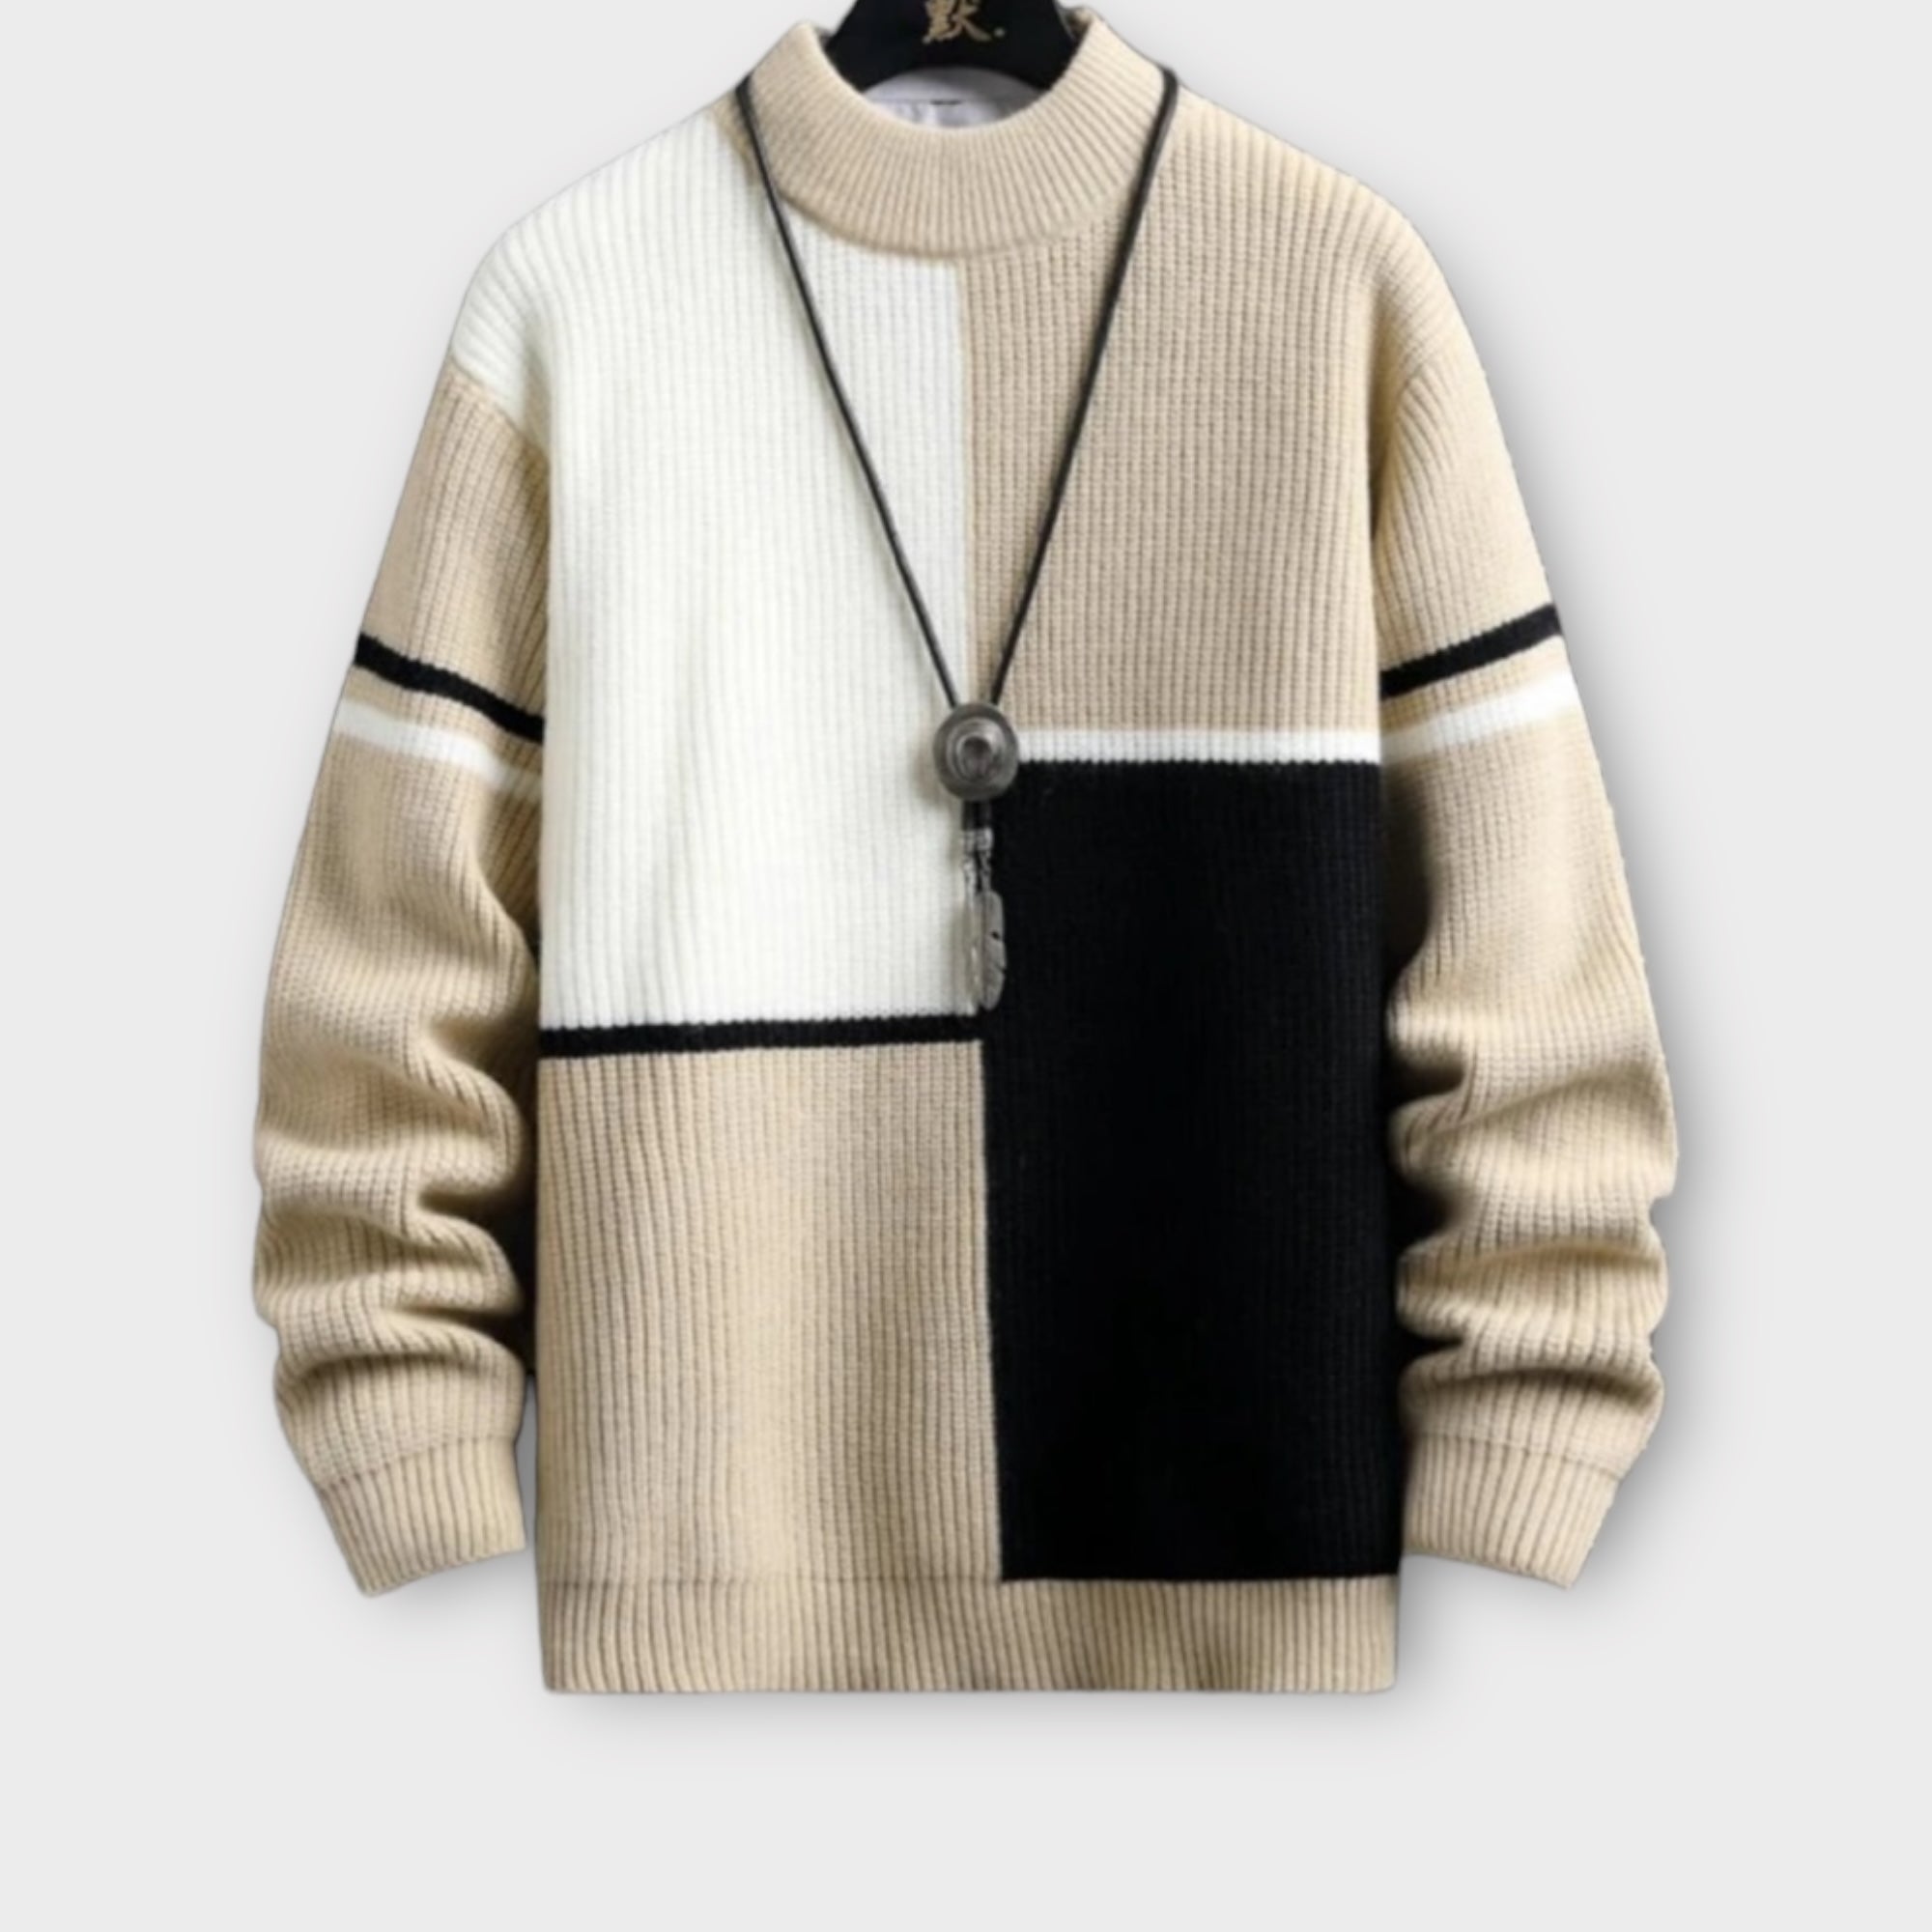 'BTS' Fashionable sweater for men